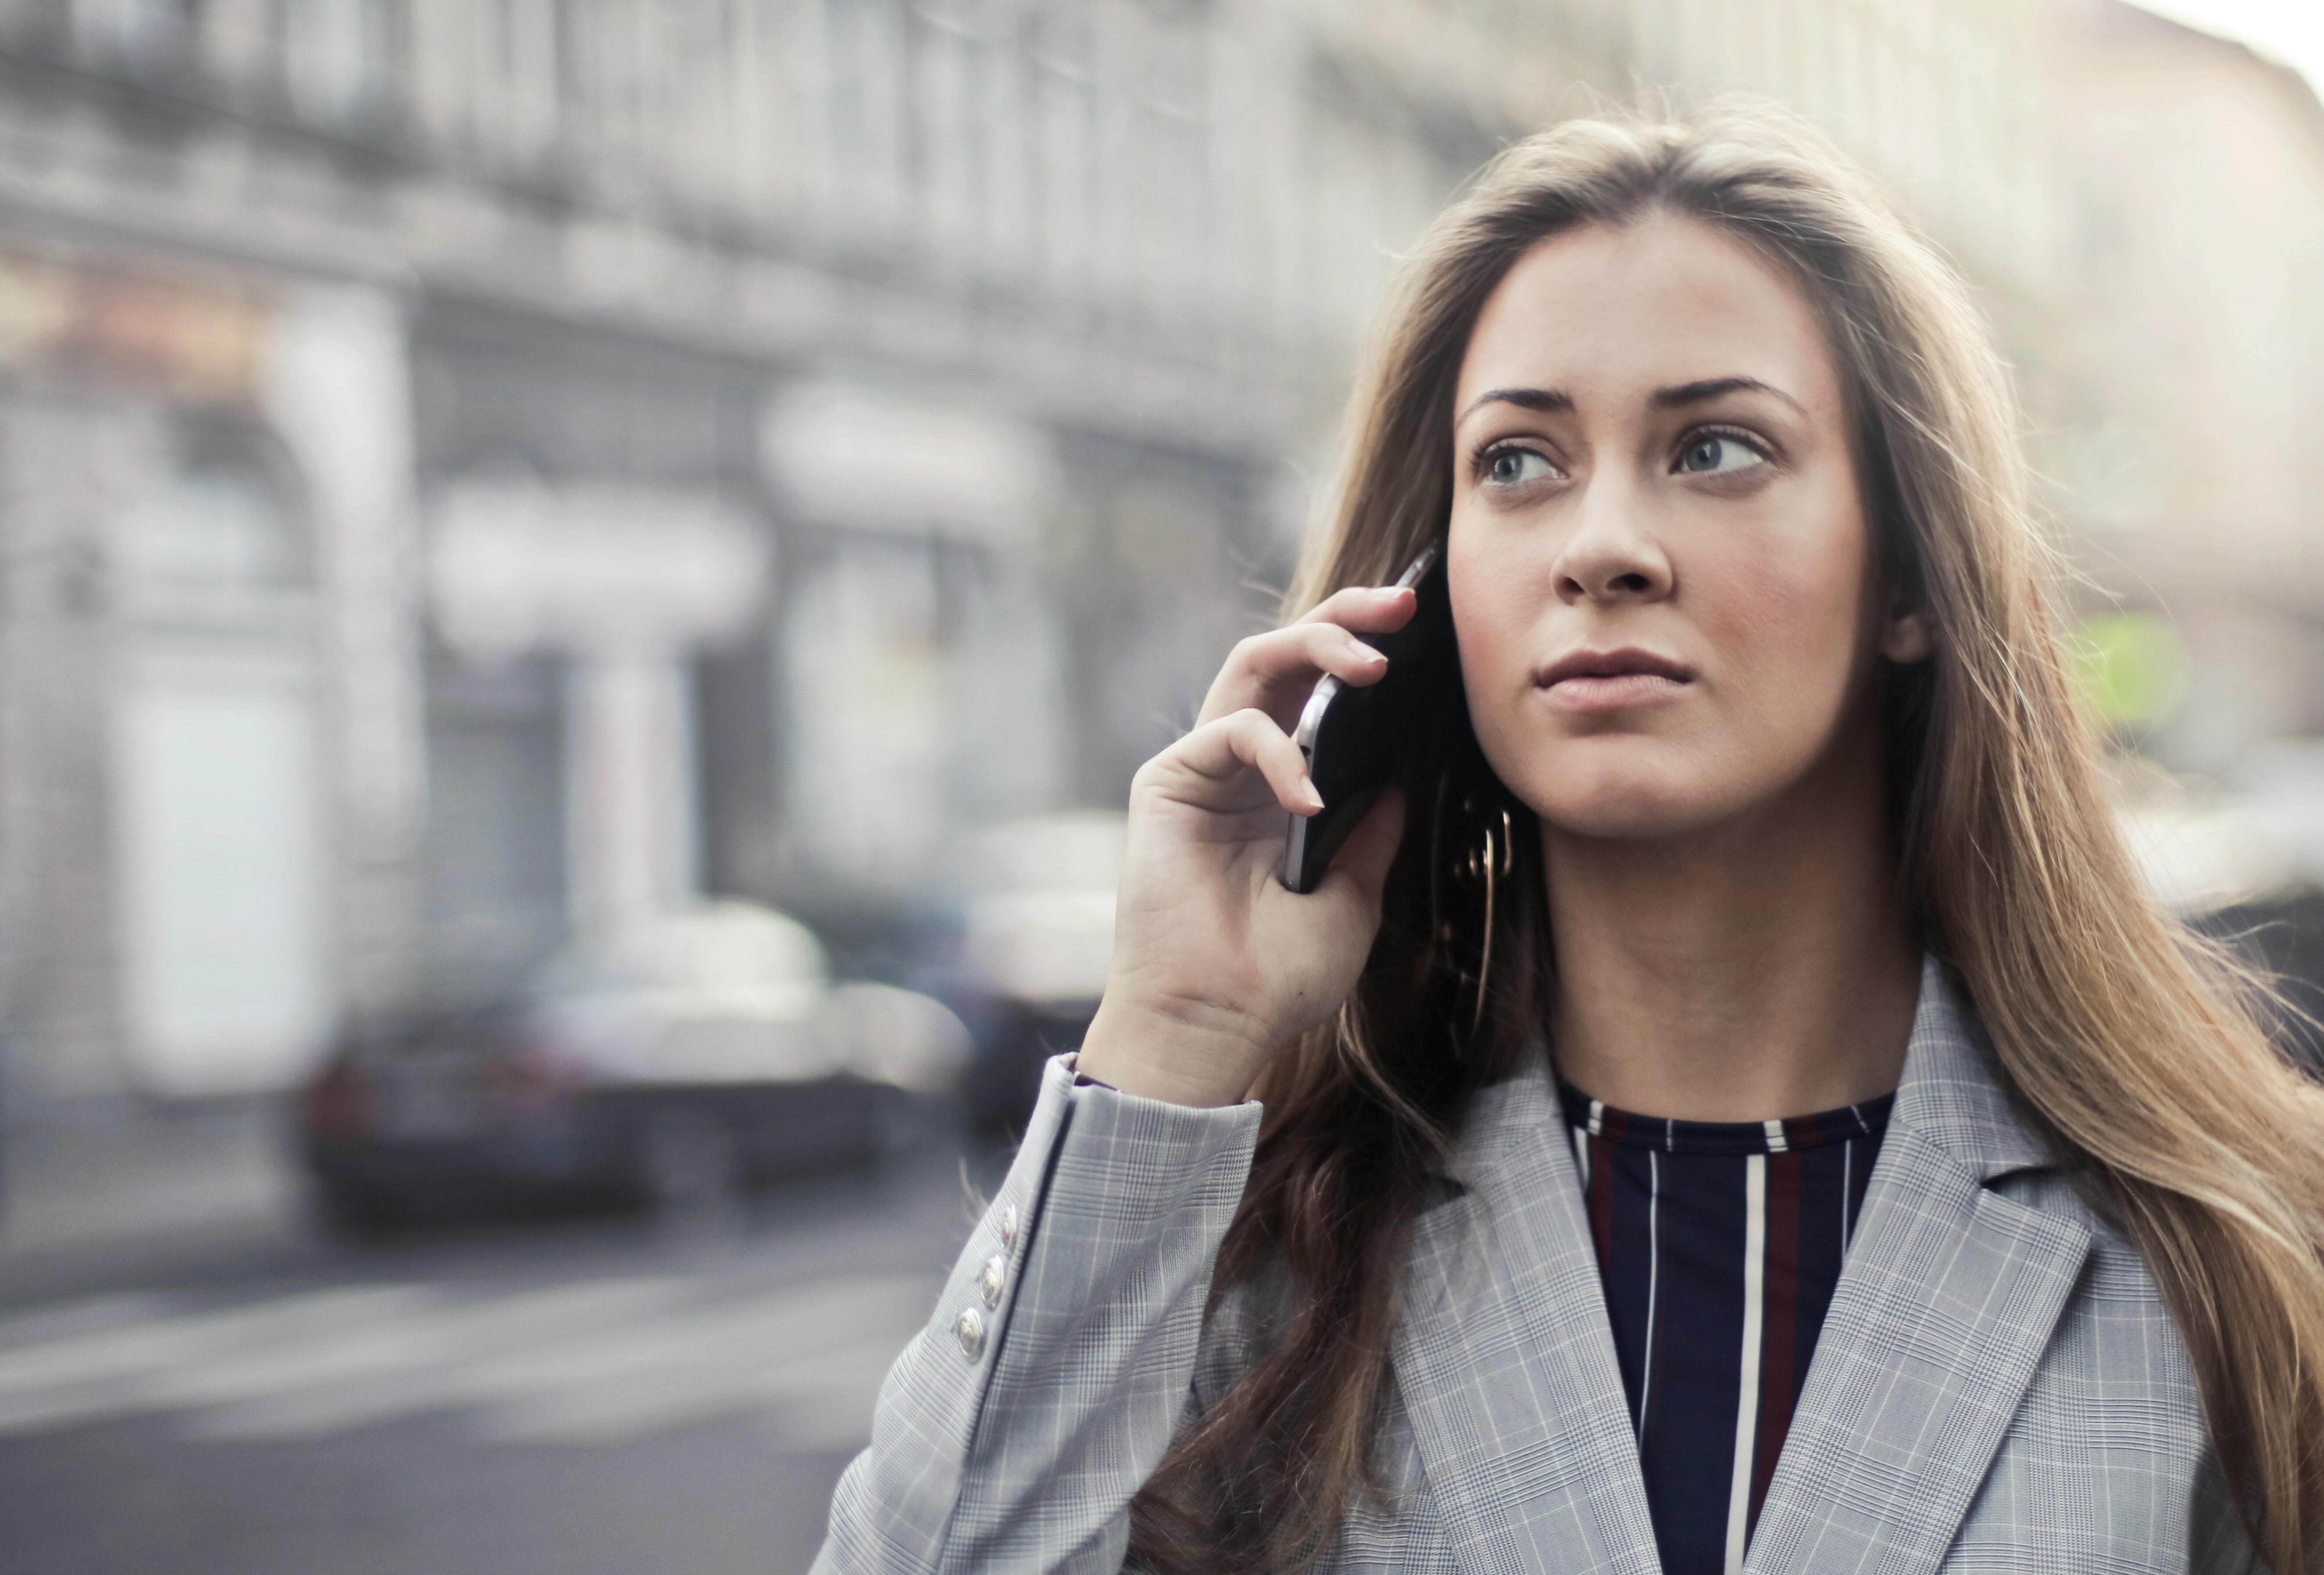 A woman taking a phone call | Source: Pexels